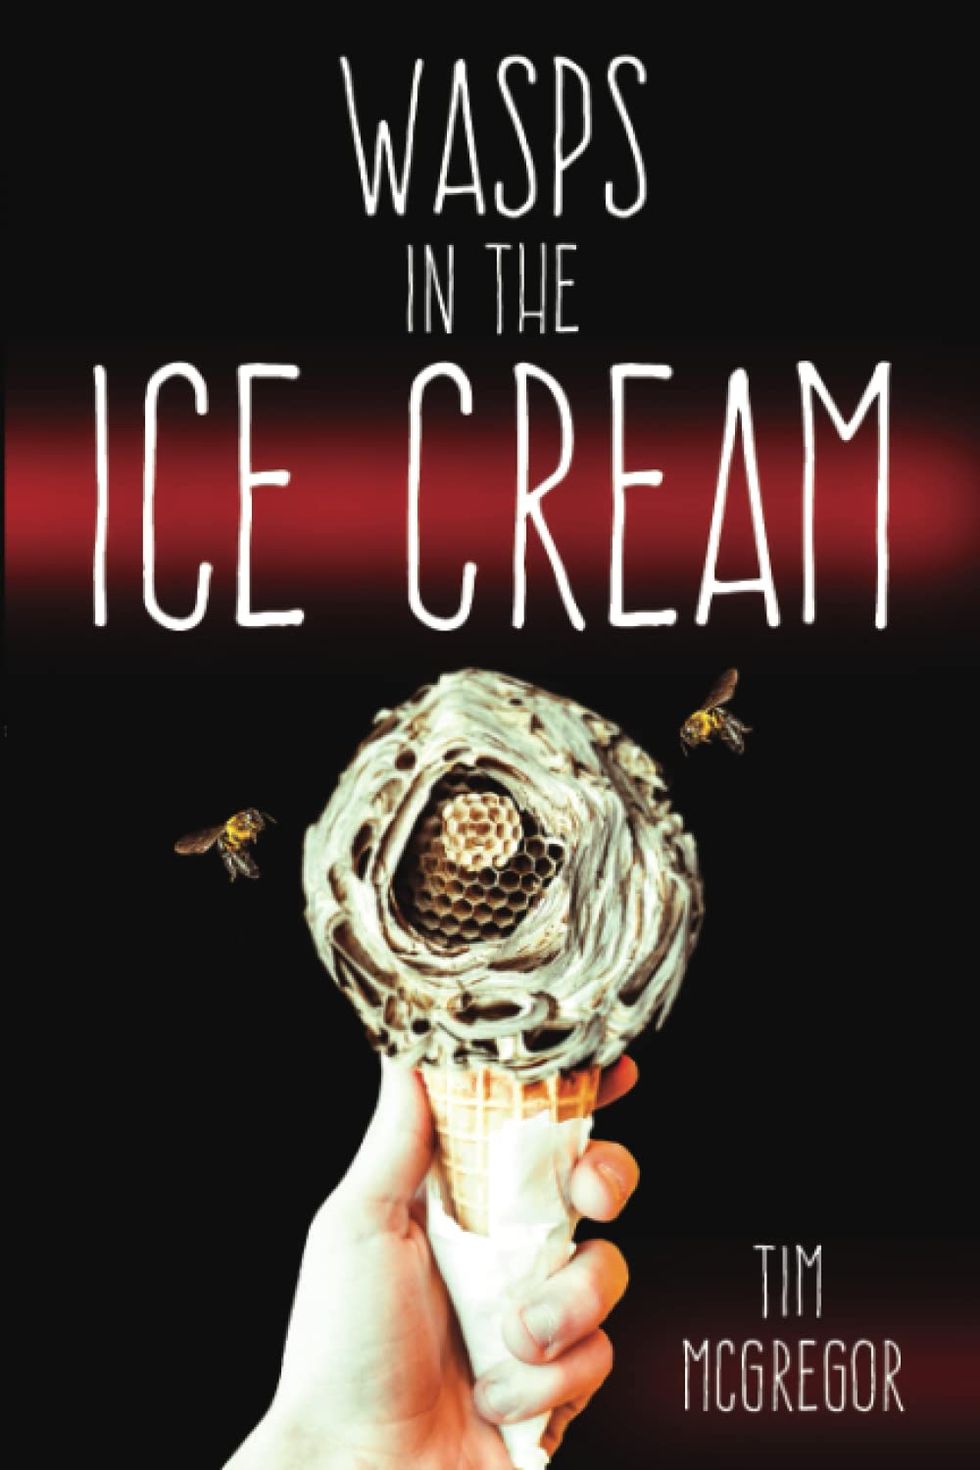 "Wasps in the Ice Cream" by Tim McGregor